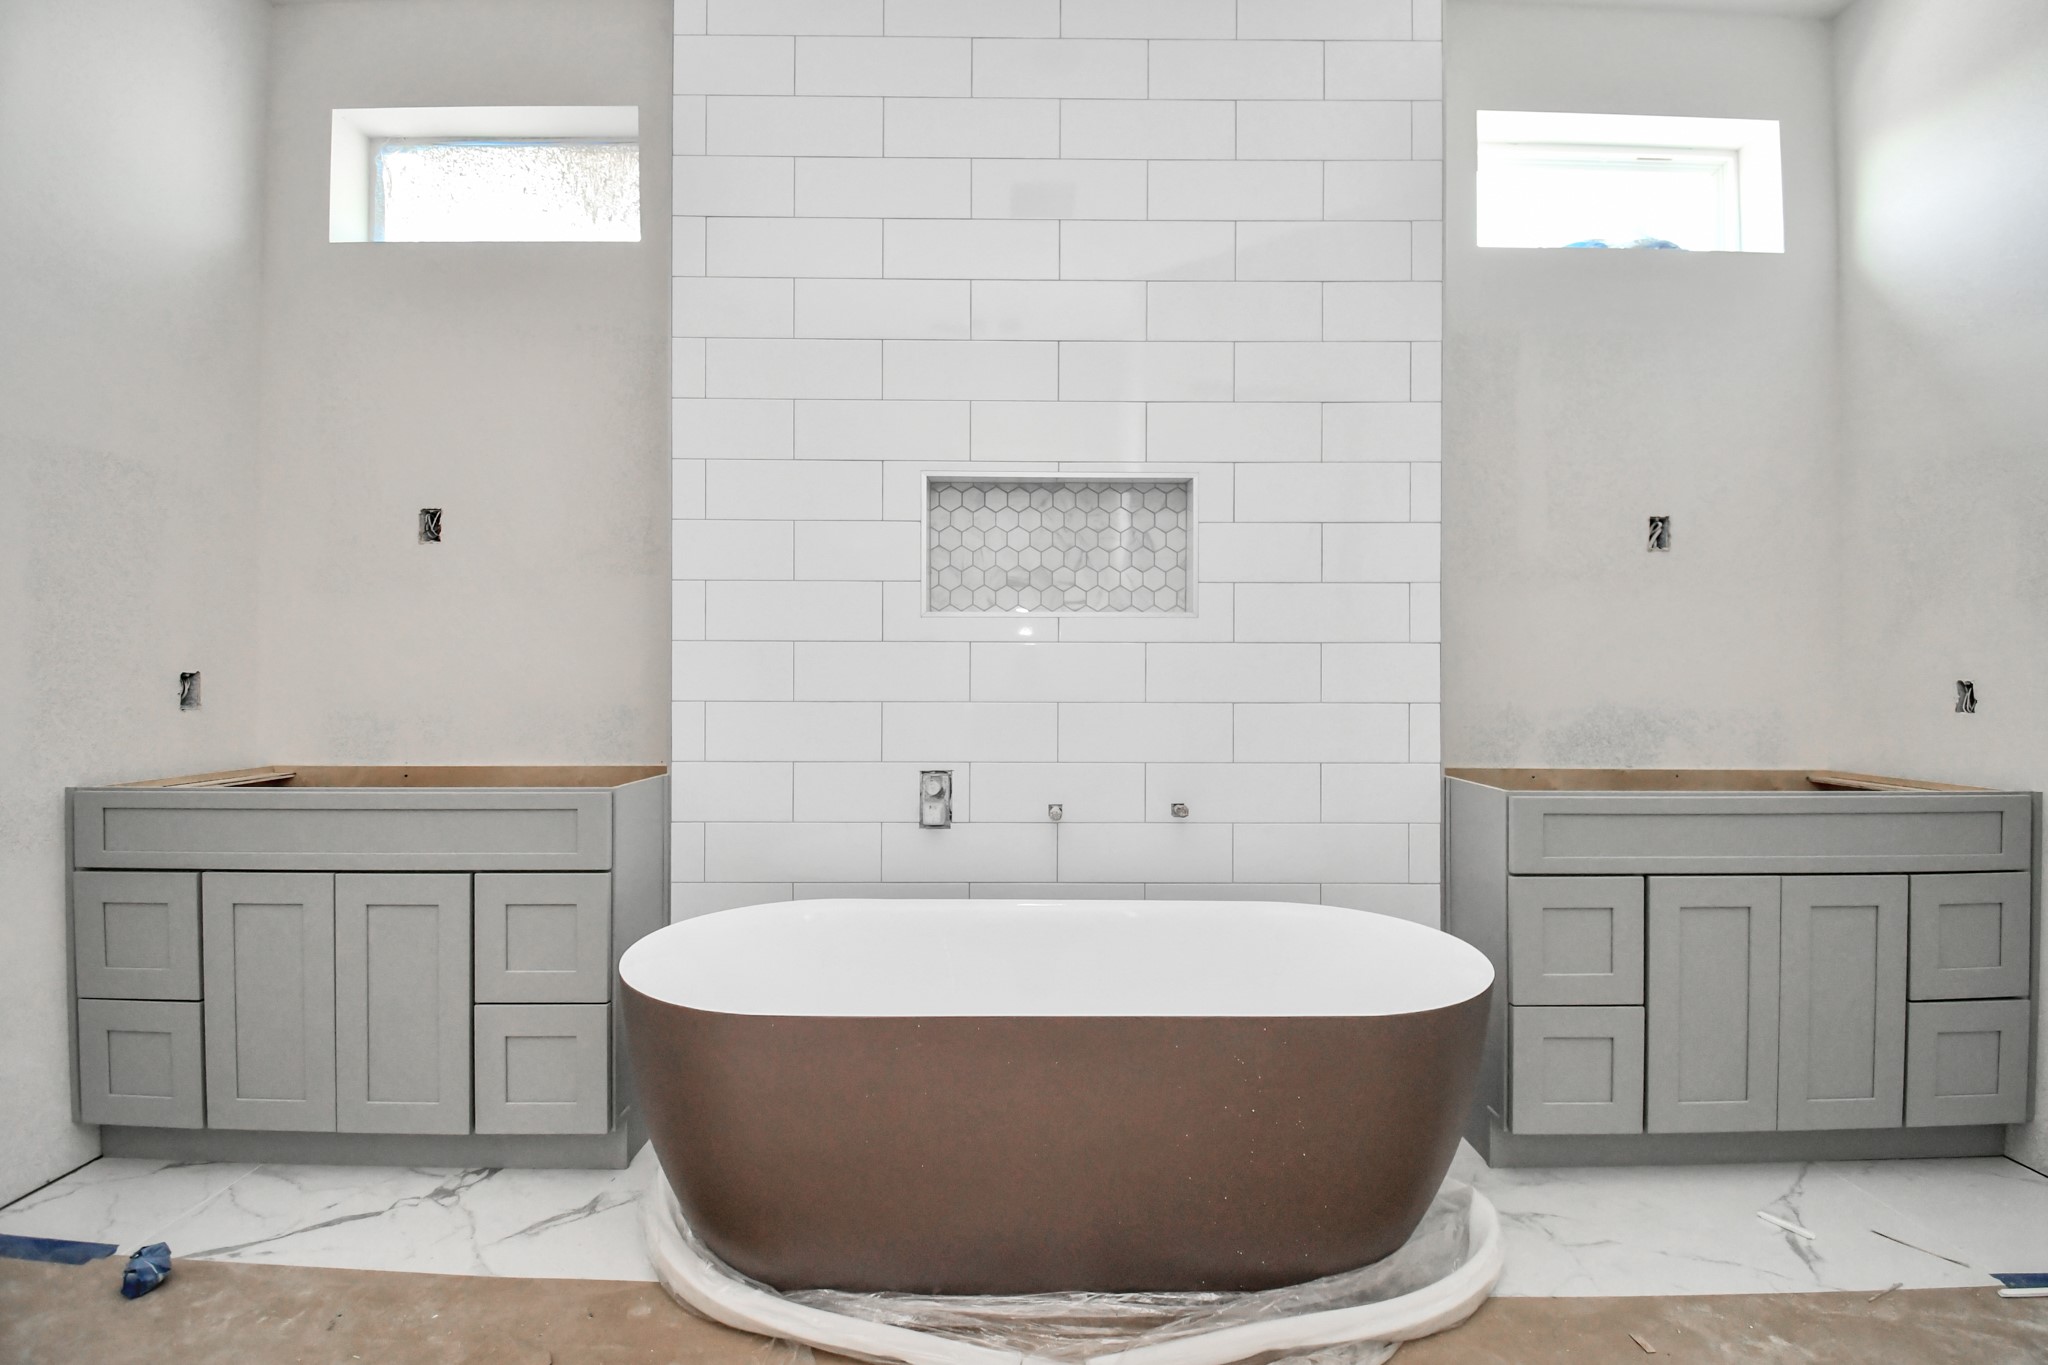 Imagine soaking in this luxe tub after a long day!